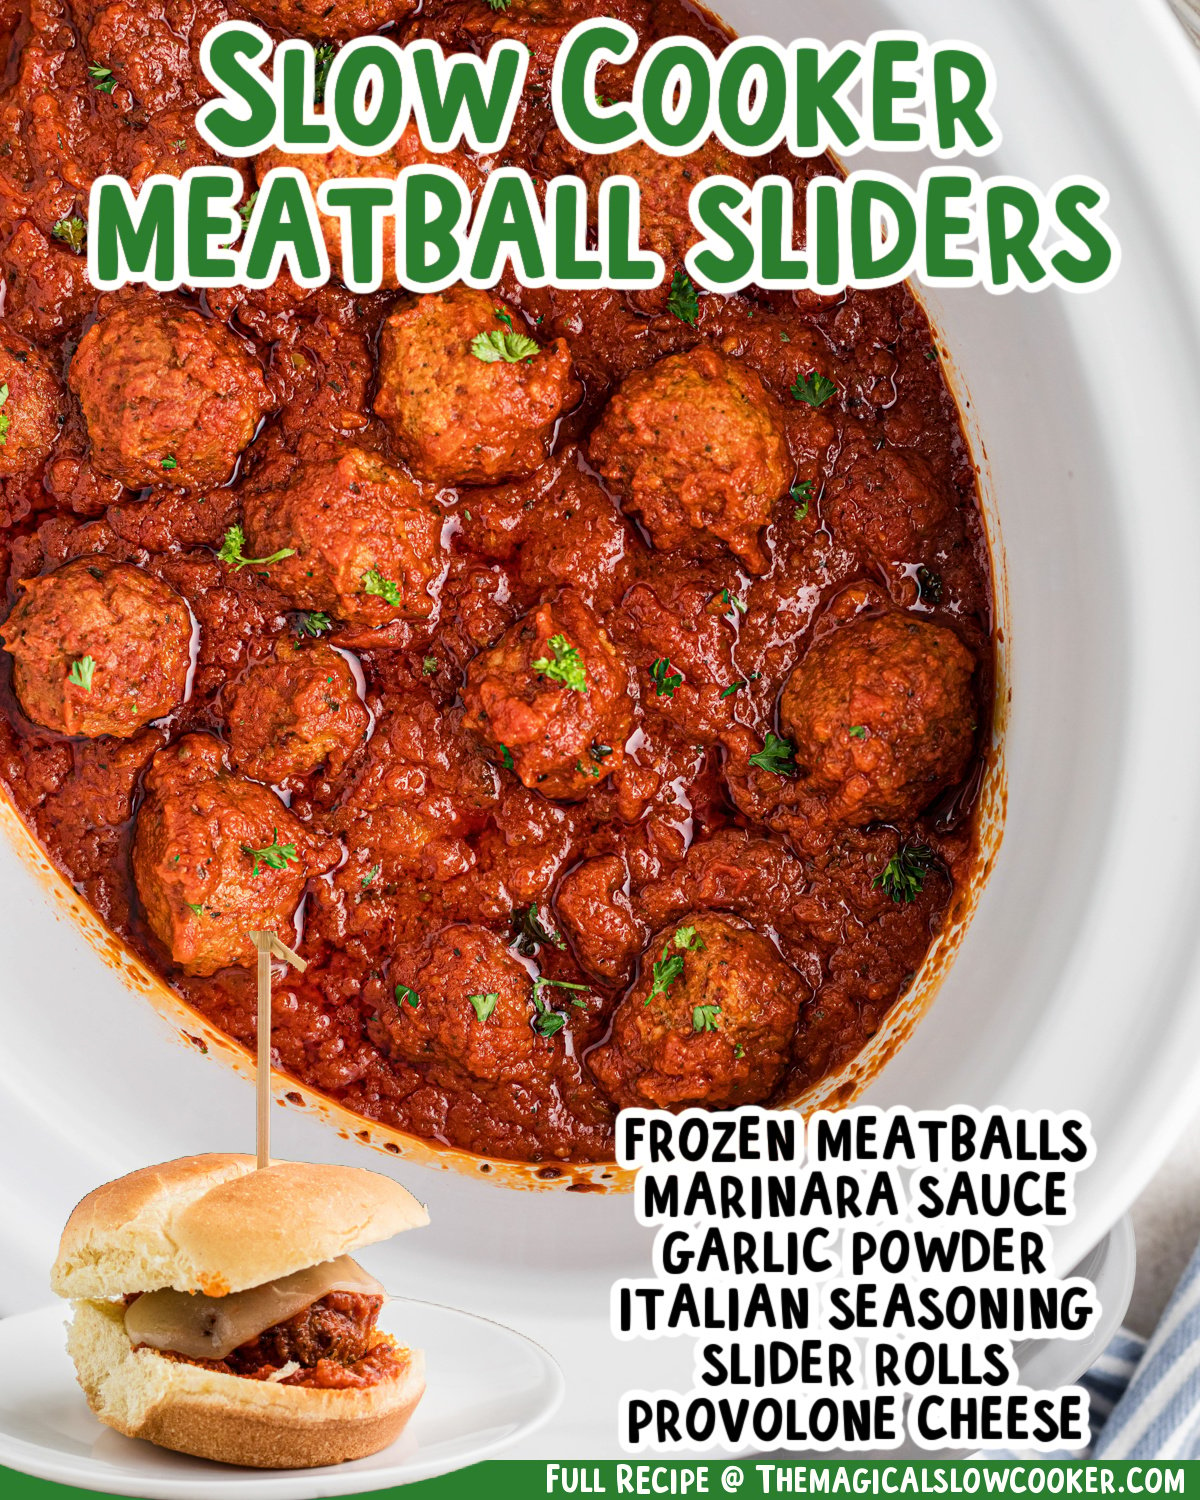 two images of slow cooker meatball sliders with text list of ingredients.